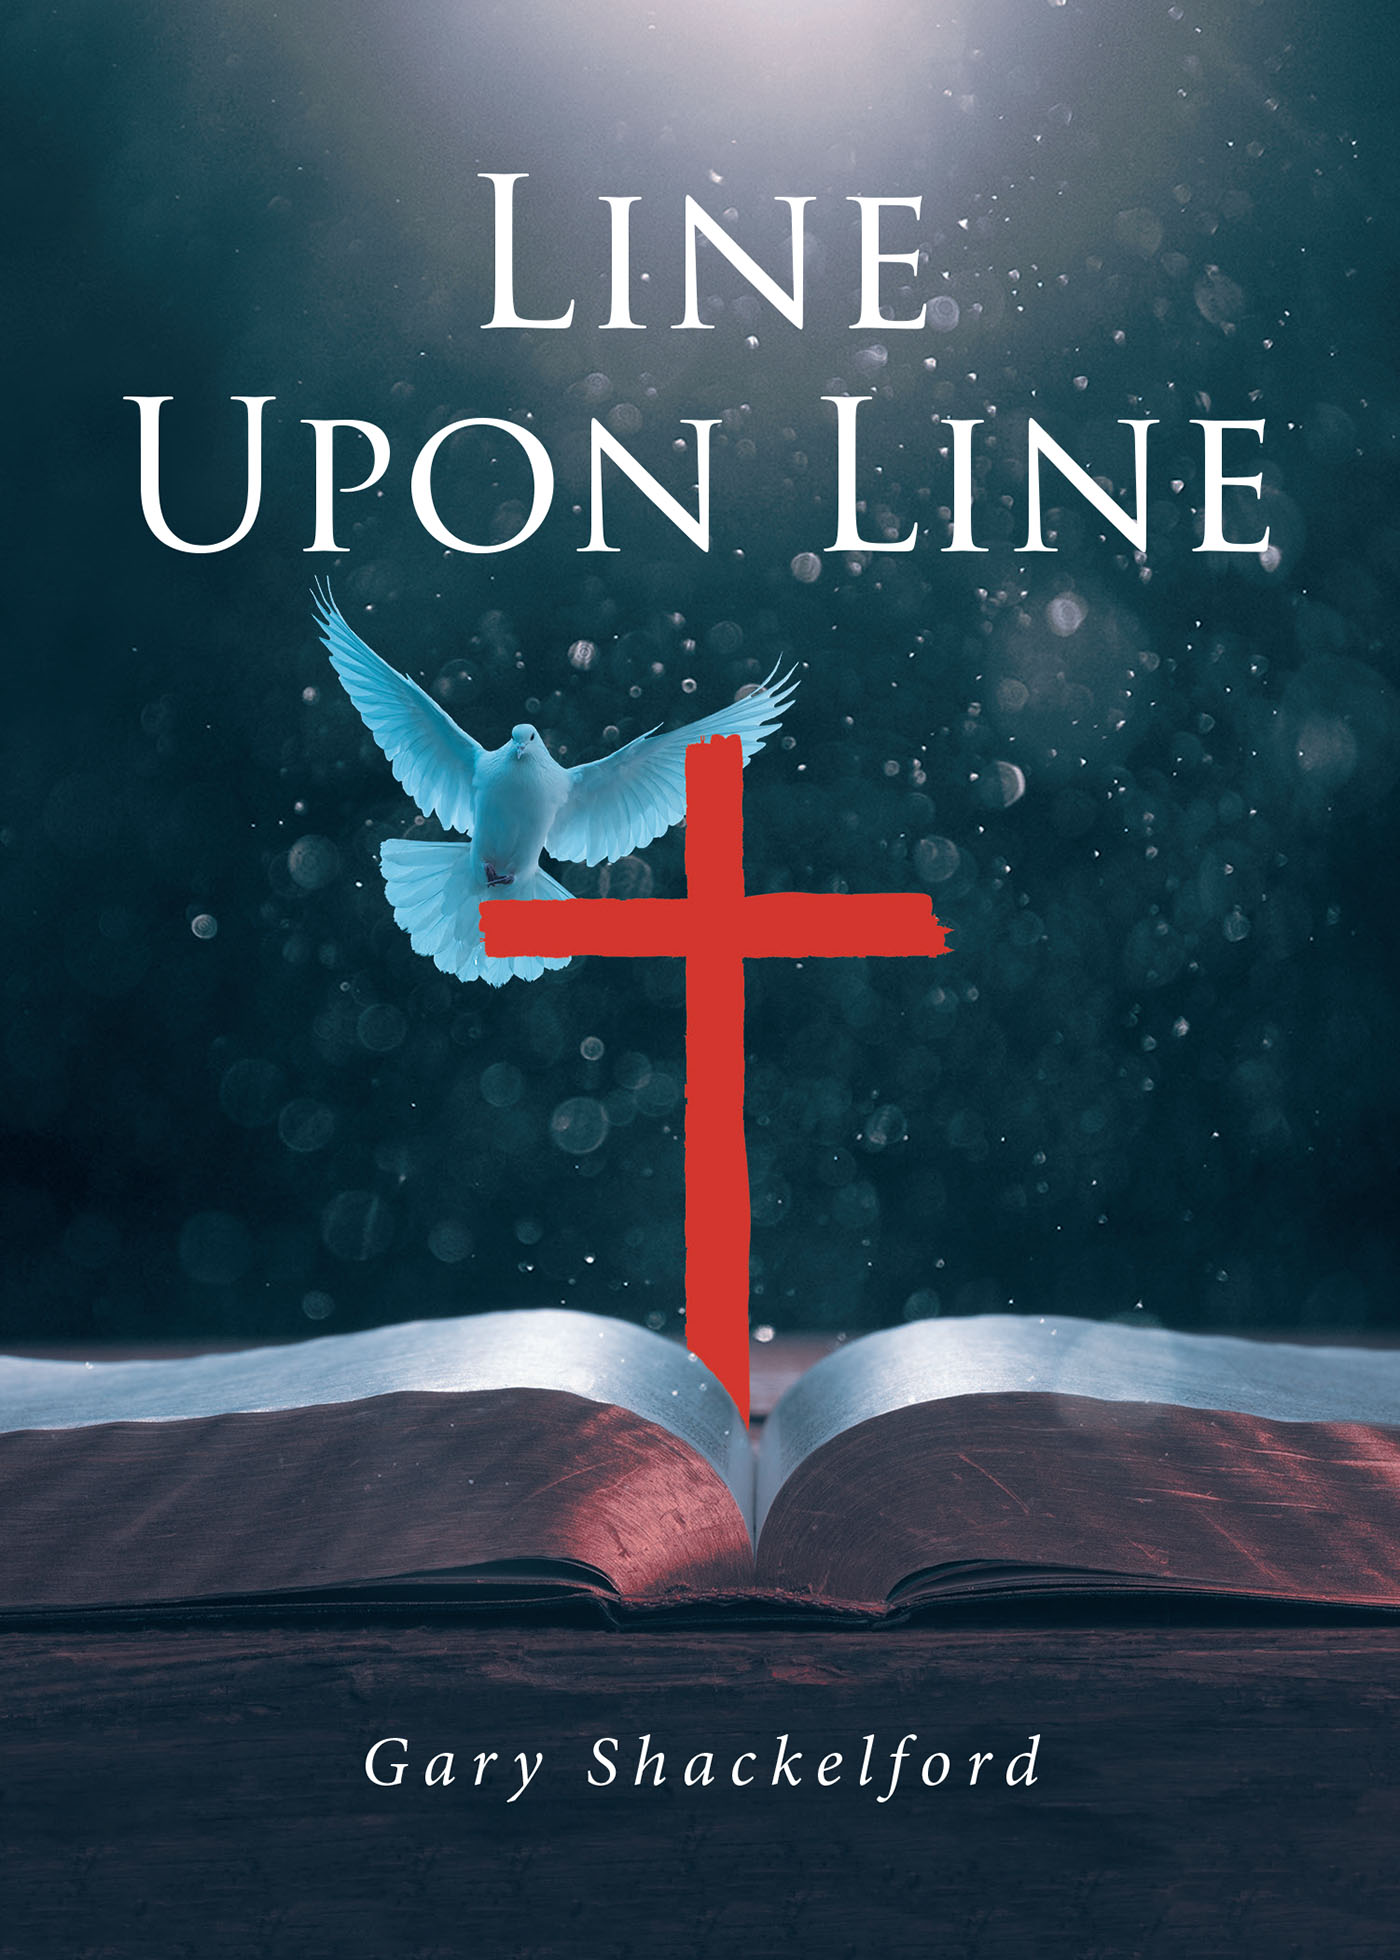 Gary Shackelford’s Newly Released “LINE UPON LINE” is a Thoughtful Discussion of Often Misunderstood Scripture